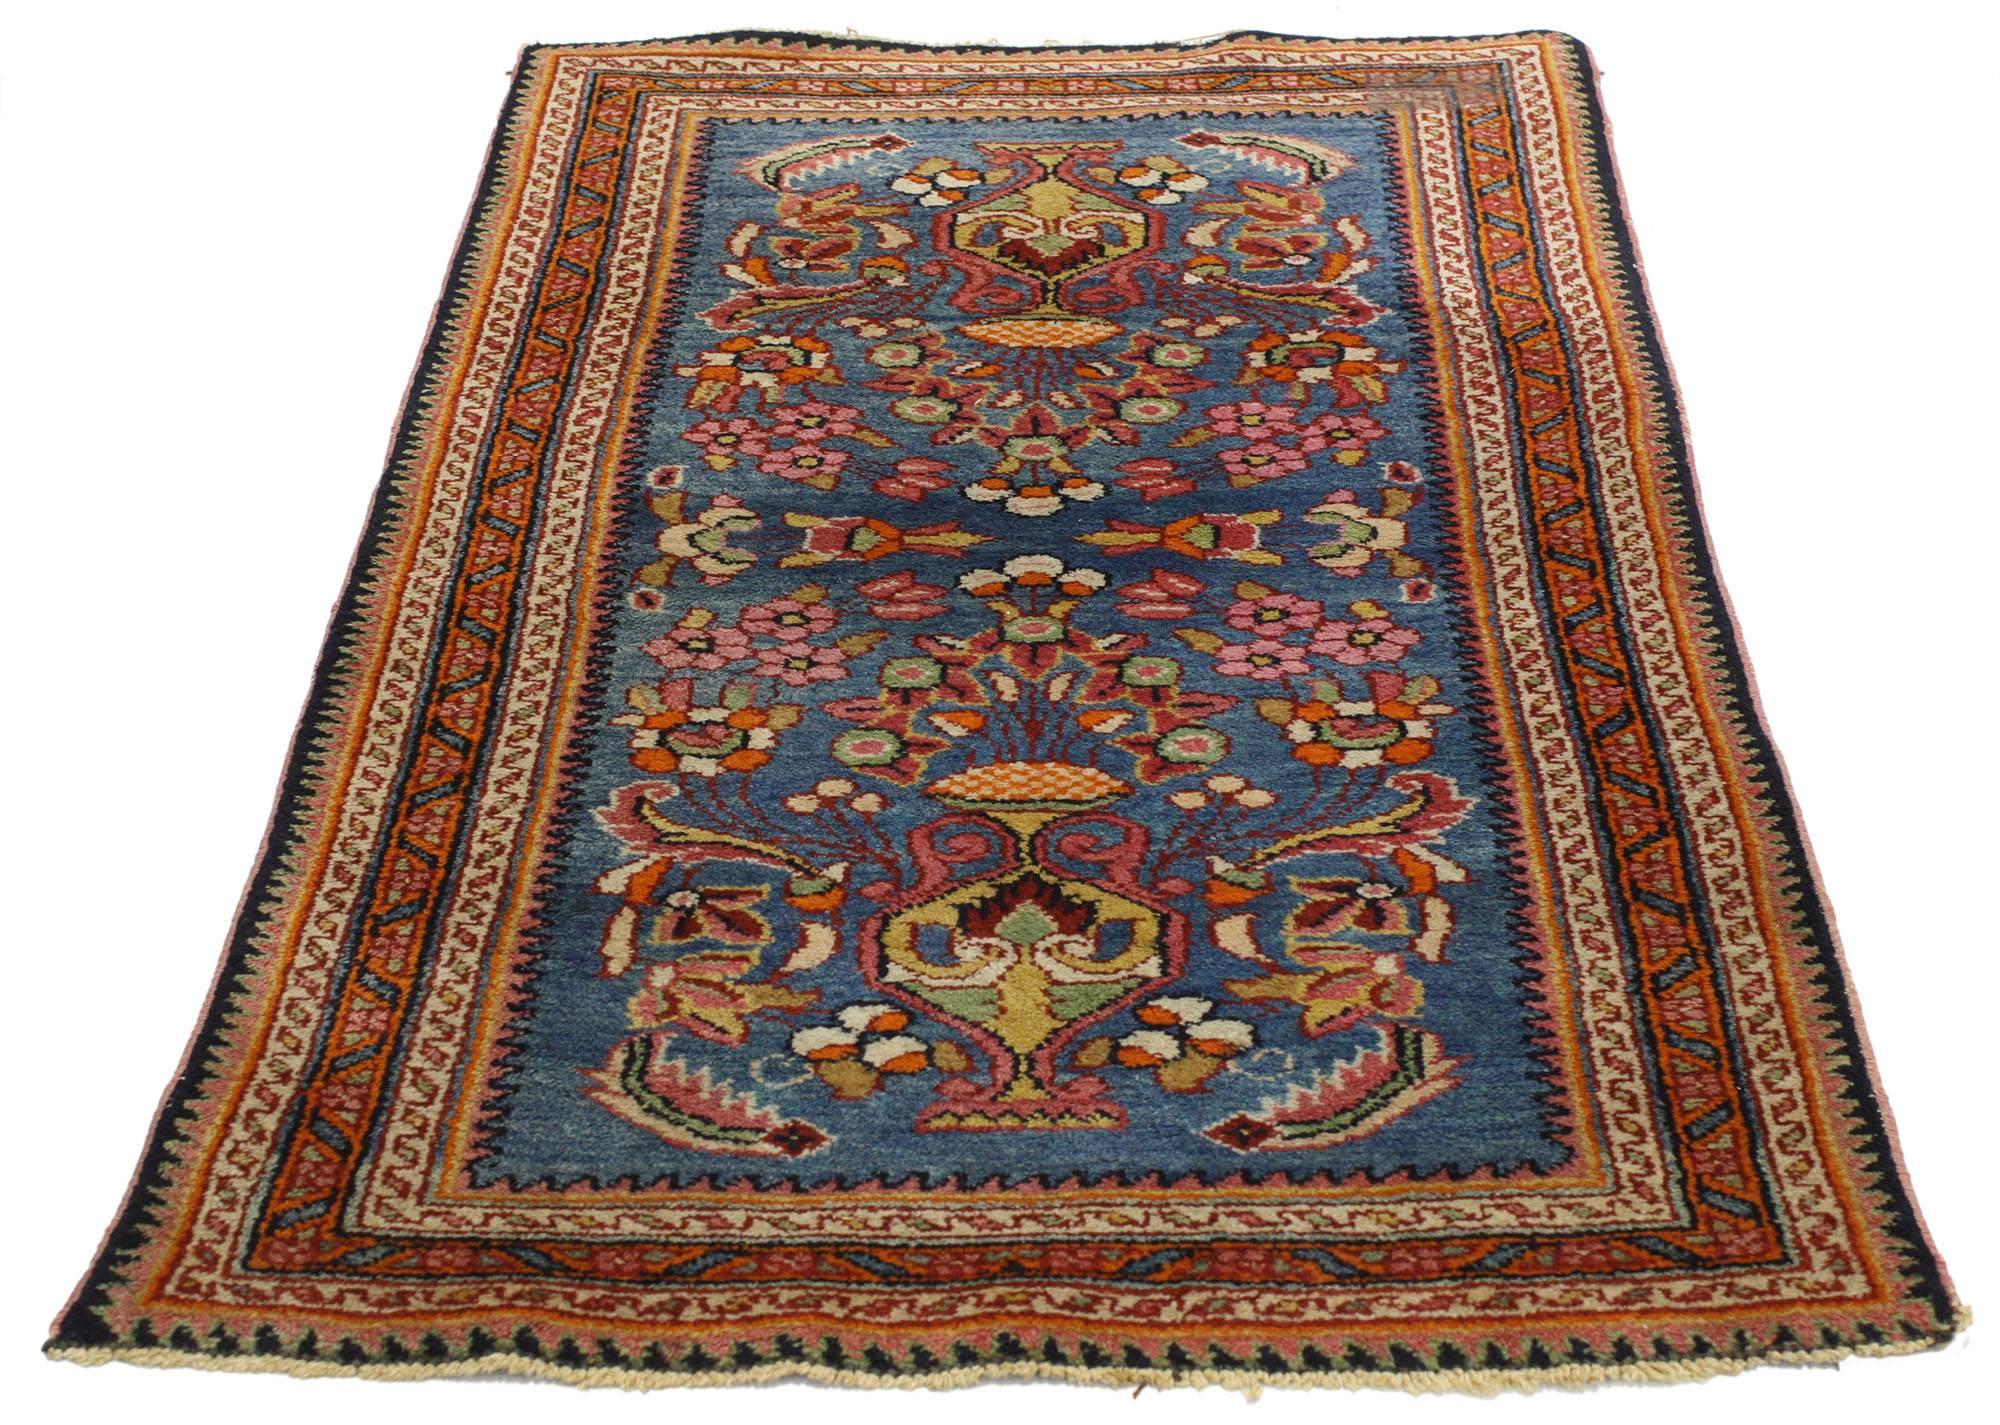 77073, an antique Lilihan rug with vase motif. This luxurious hand-knotted wool antique Persian Lilihan rug features a double vase design on an abrashed field dotted with cherry pink flowers and a compound tribal patterned band. Rendered in a